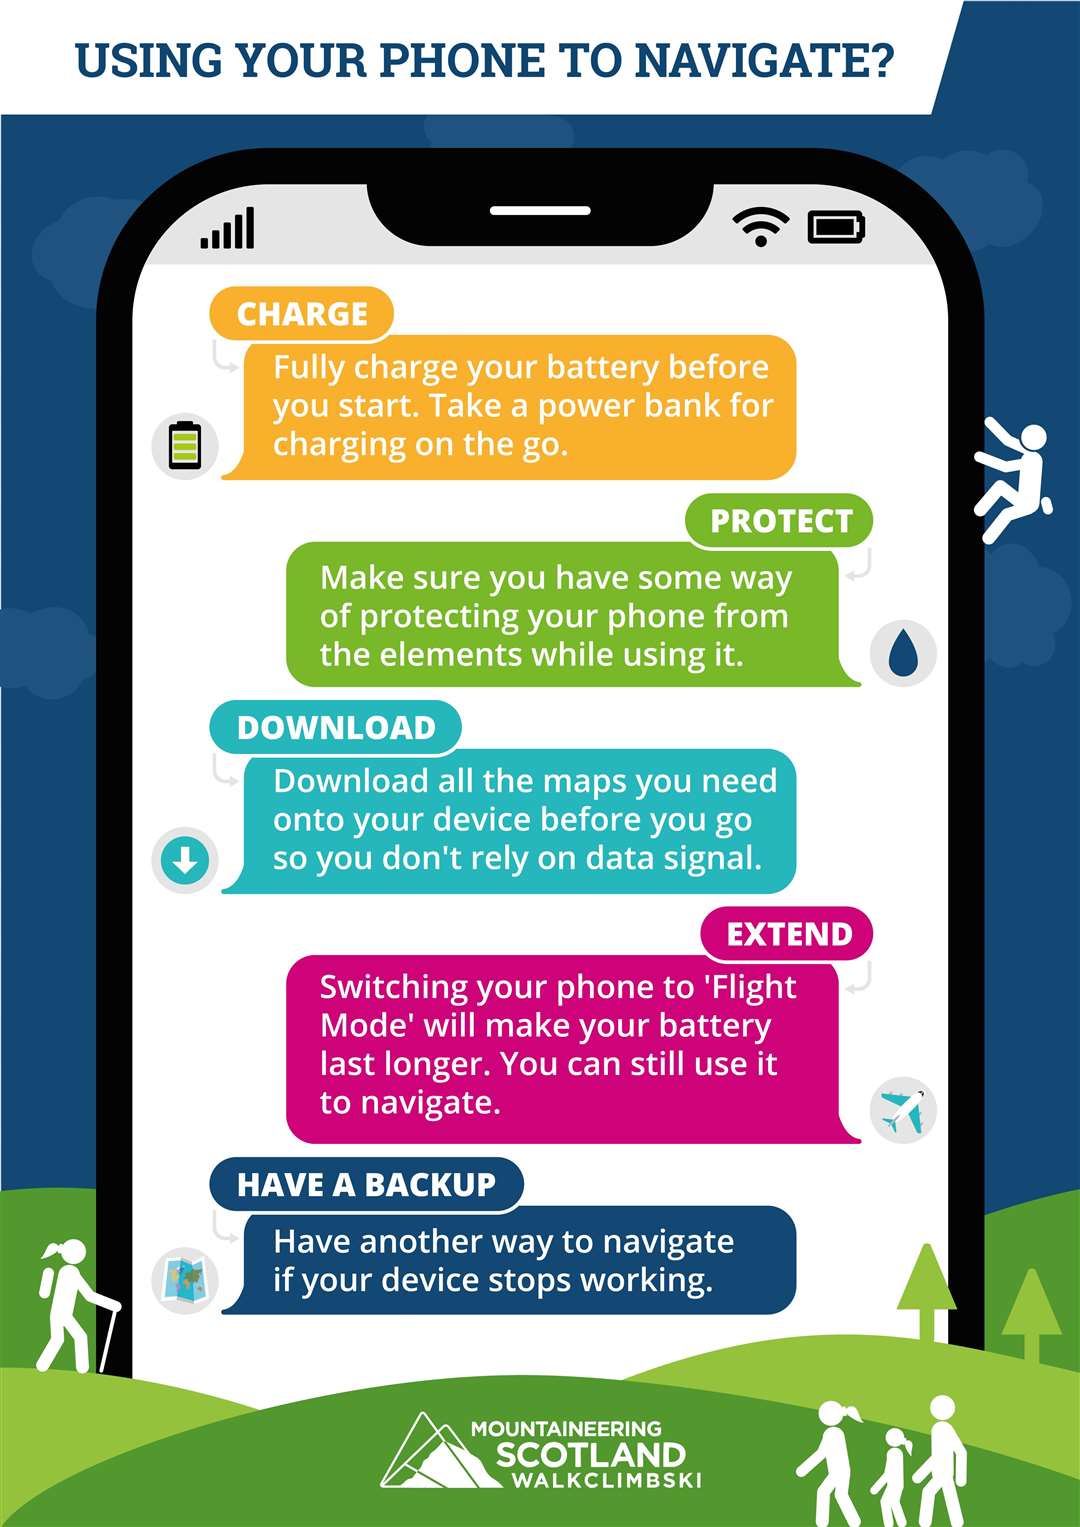 Mountaineering Scotland safety advisers have provided a handy infographic to help remember the top tips.